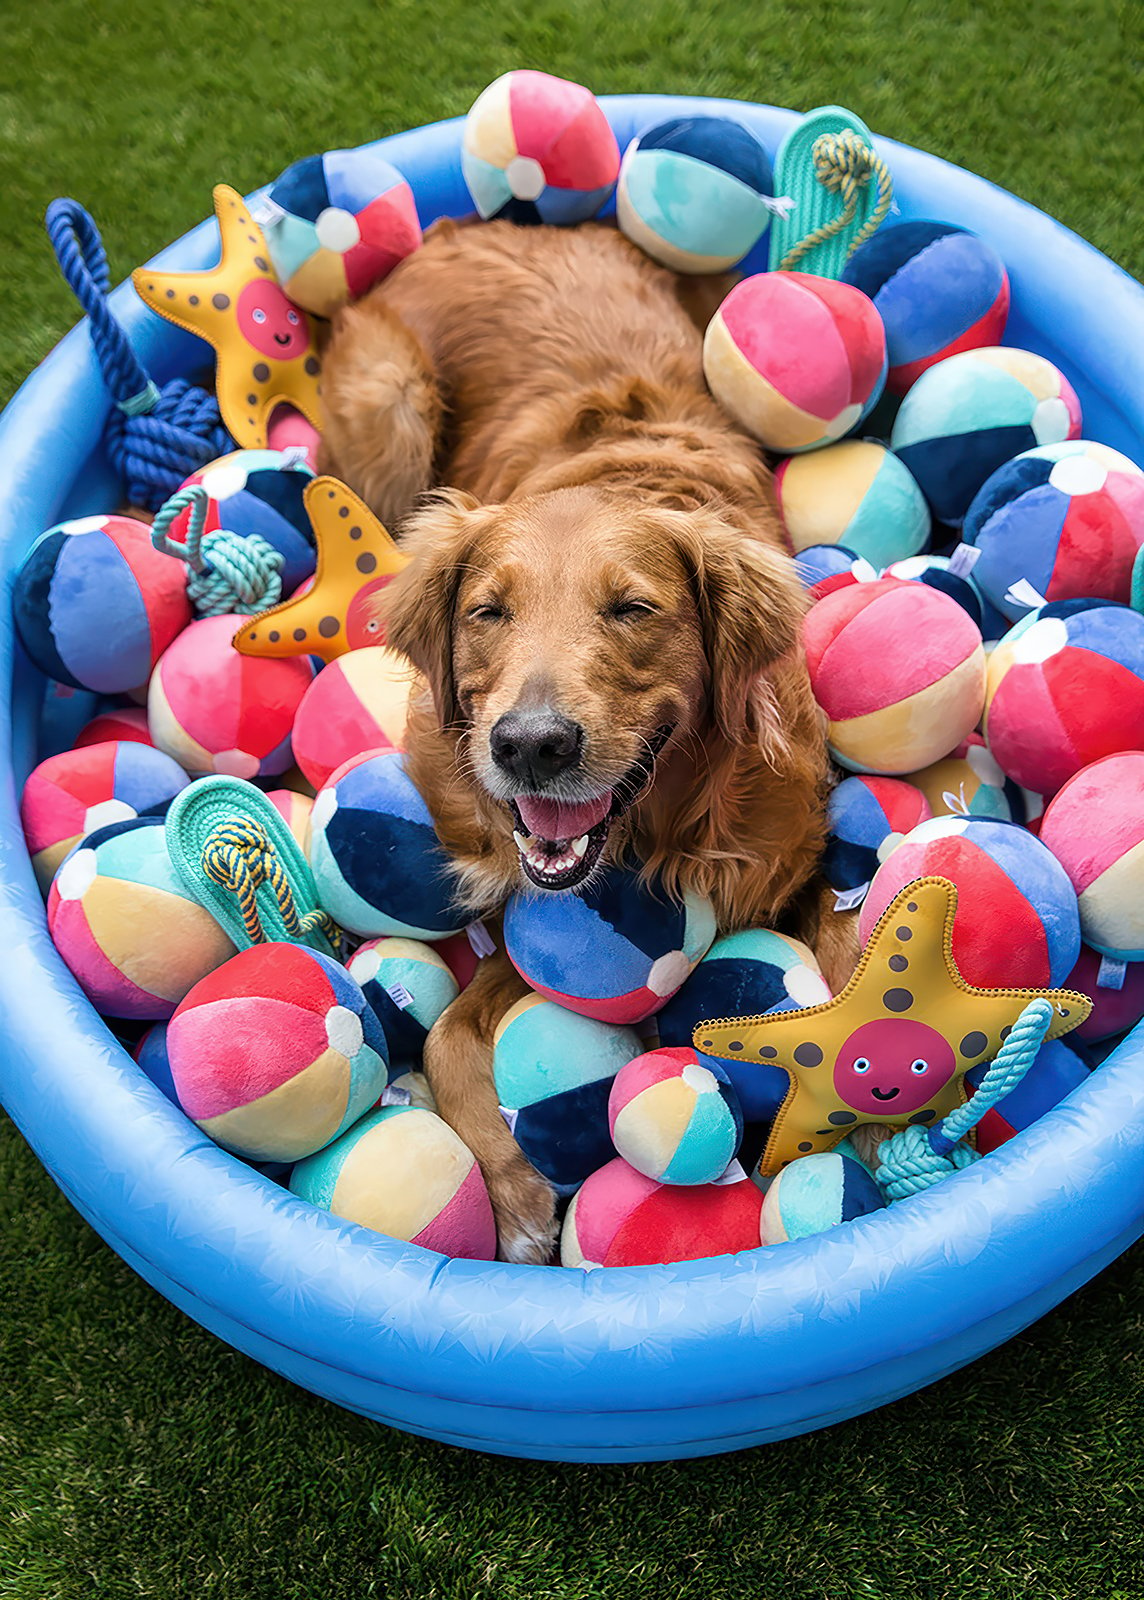 A golden retriever is lying in a blue inflatable pool filled with colorful plush toys, including beach balls, rope toys, and starfish. The dog looks happy and content, with its eyes closed and mouth open in a relaxed expression. The scene is set on a grassy area.